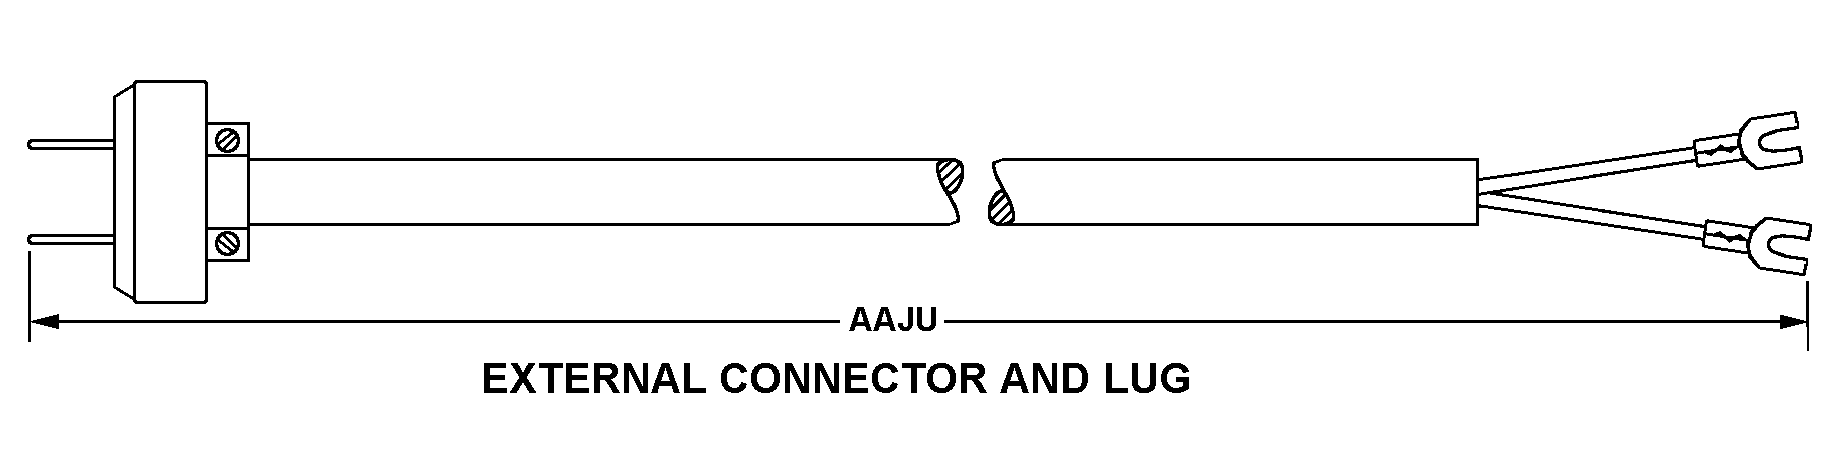 EXTERNAL CONNECTOR AND LUG style nsn 6150-01-257-1854